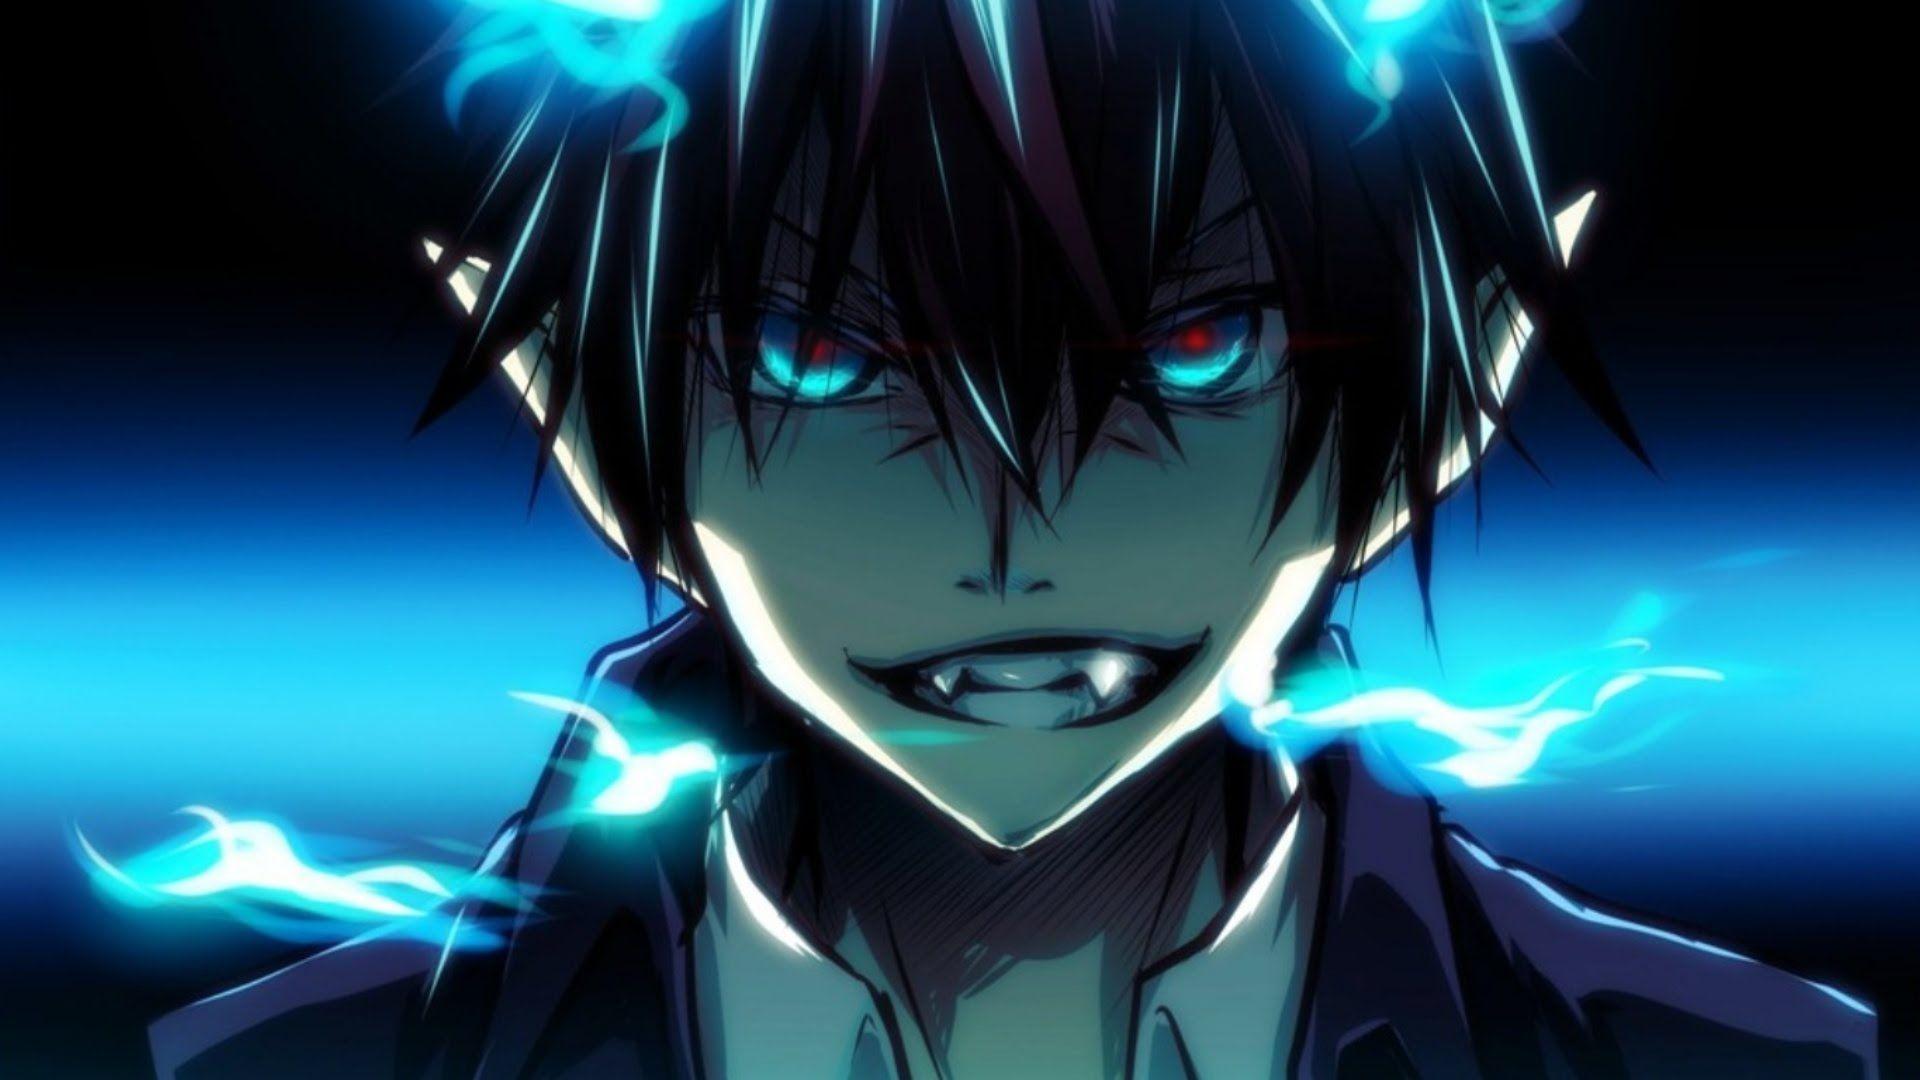 9. "Blue Exorcist" - wide 7